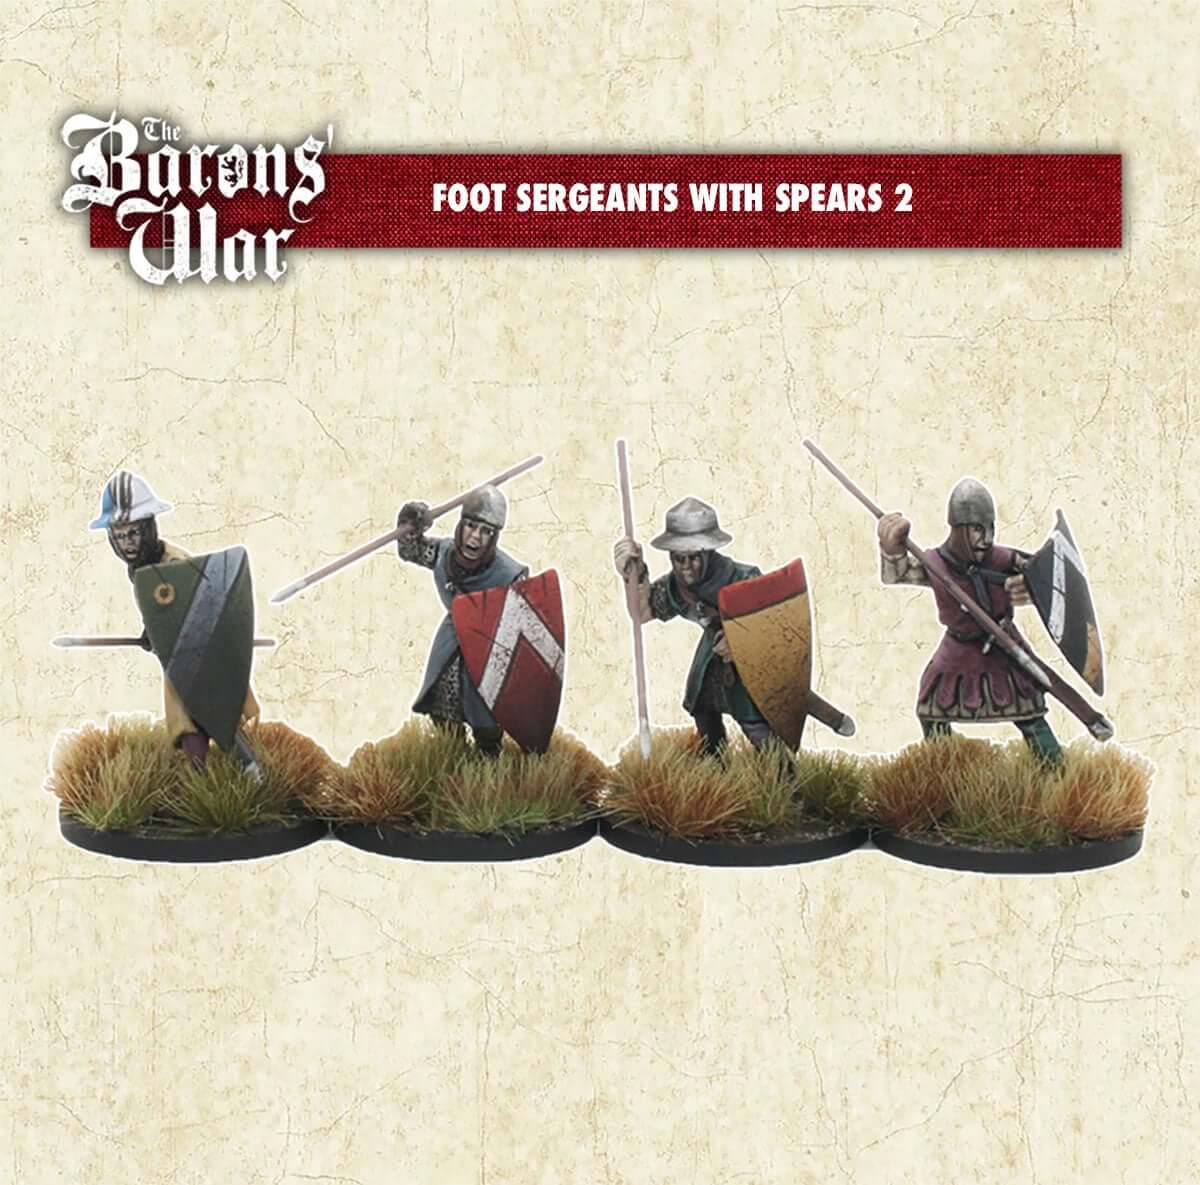 Baron's War Foot Sergeants with Spears 2